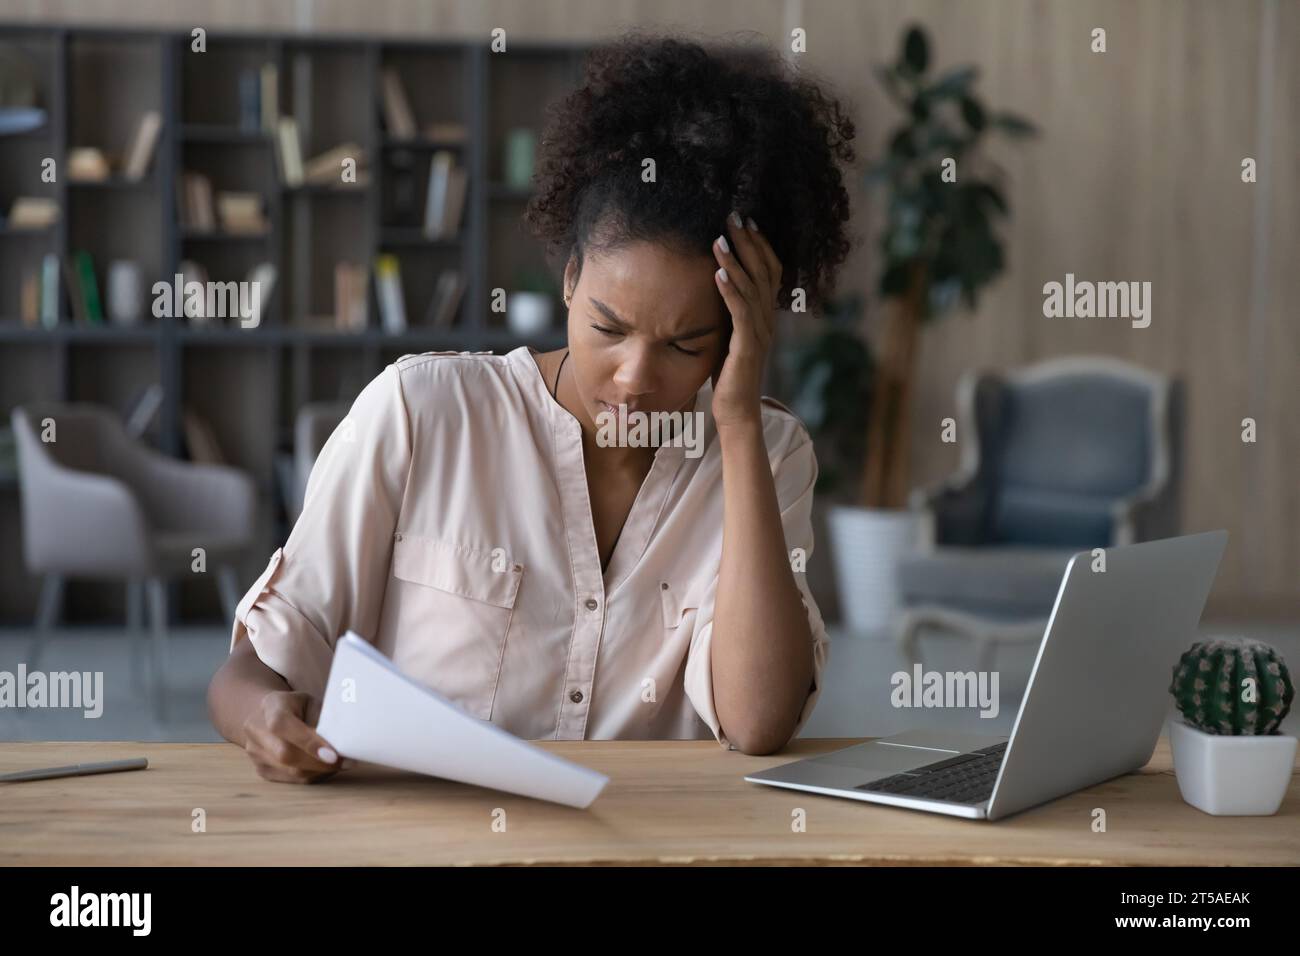 Shocked young African American woman getting document with bad news Stock Photo